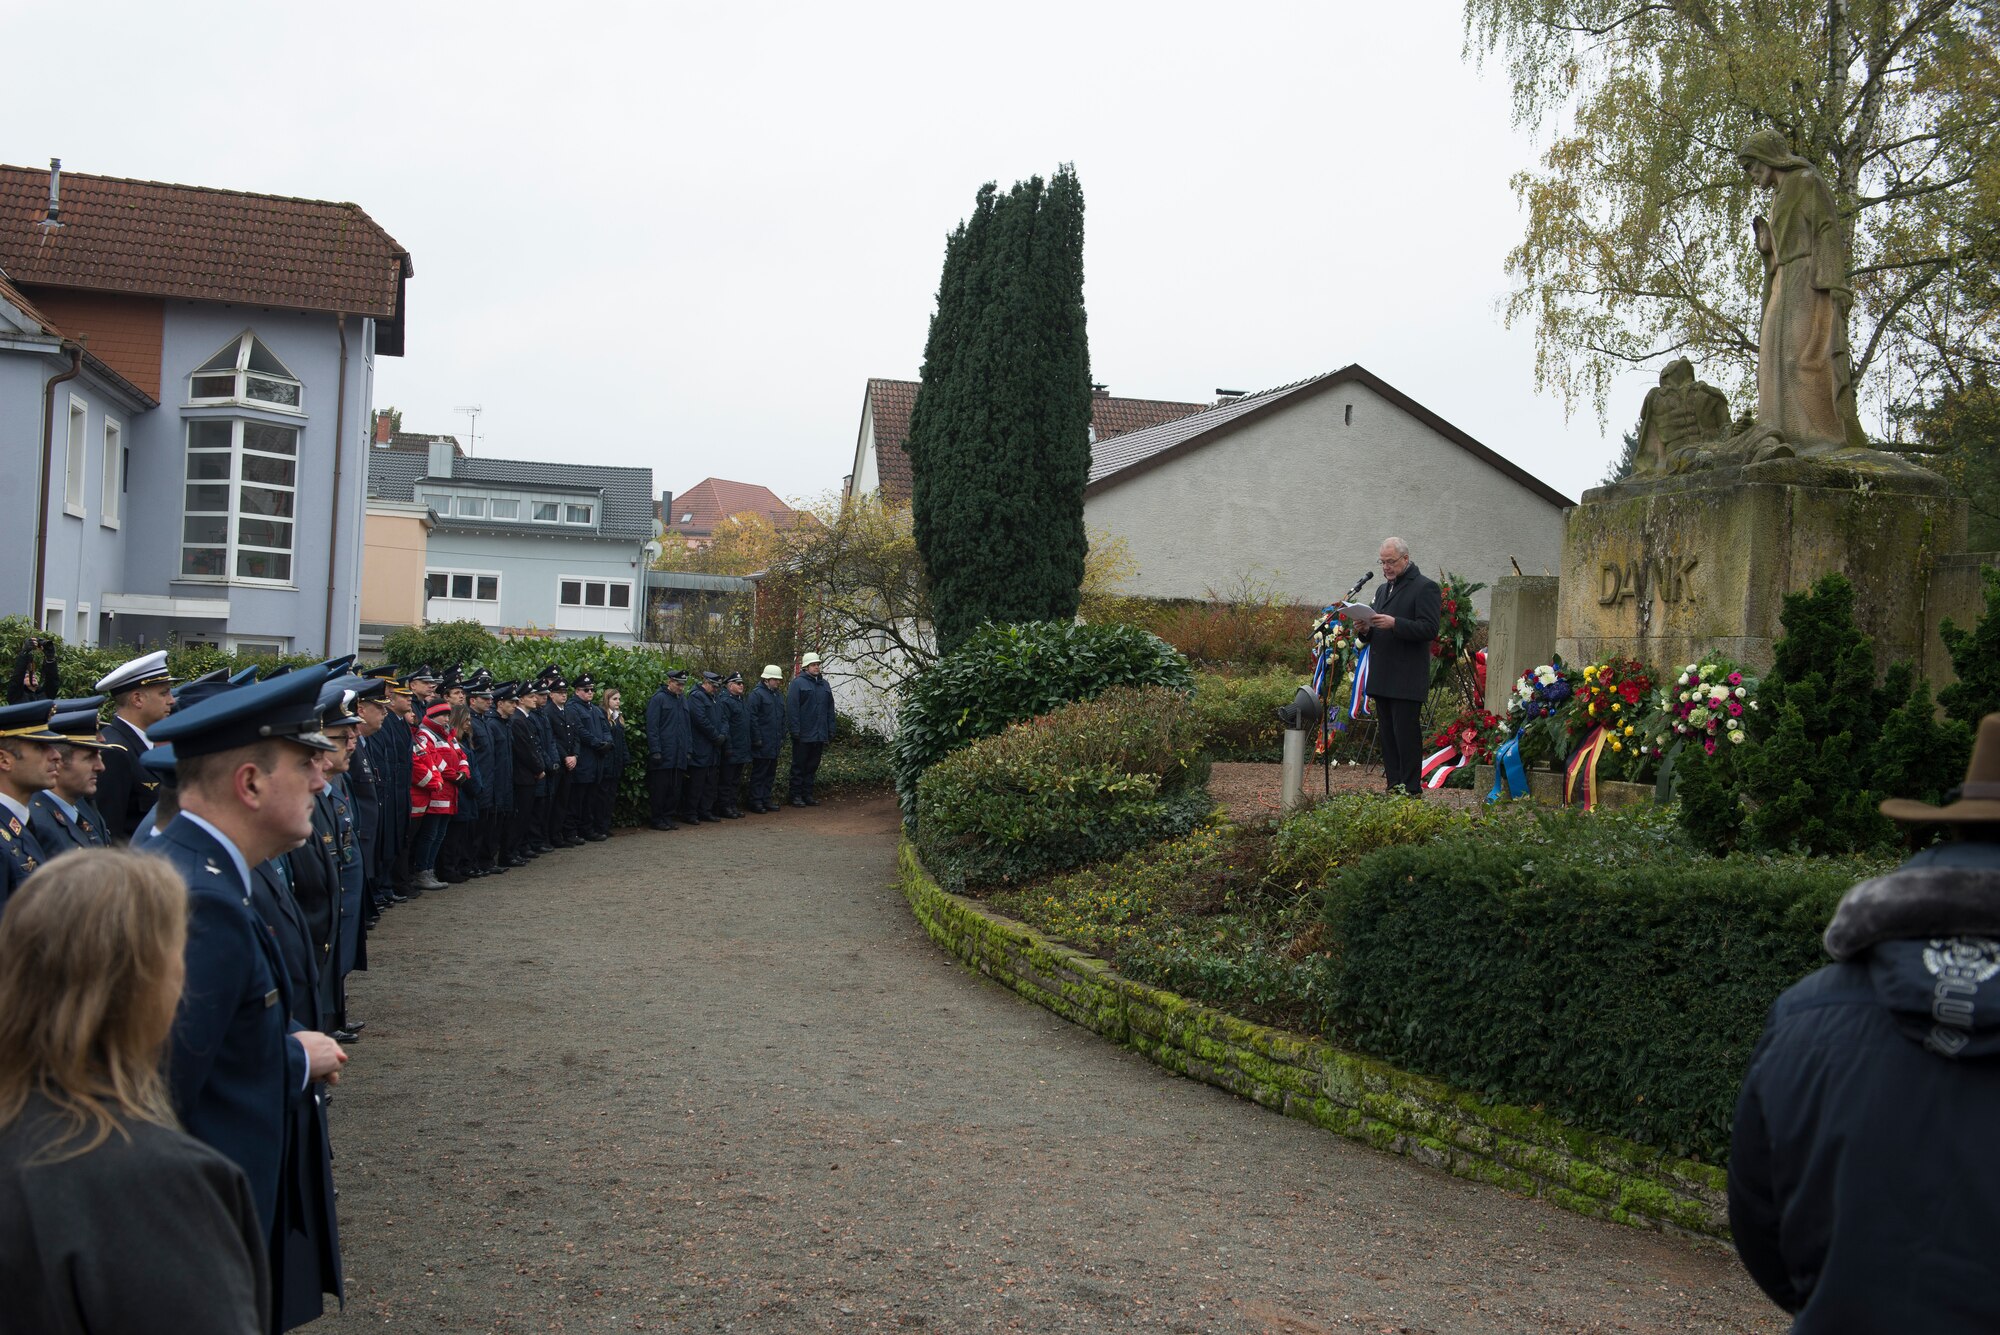 Ralf Hechler, Ramstein-Miesenbach mayor, speaks to various citizens and NATO representatives during the town's annual National Day of Mourning Ceremony, Nov. 17, 2019. The National Day of Mourning is a German holiday where citizens mourn victims of war. THe National Day of Mourning has been around since 1922. The day was dedicated to the victims of World War I. The National Day of Mourning is categorized as a silent day (Stiller Tag).